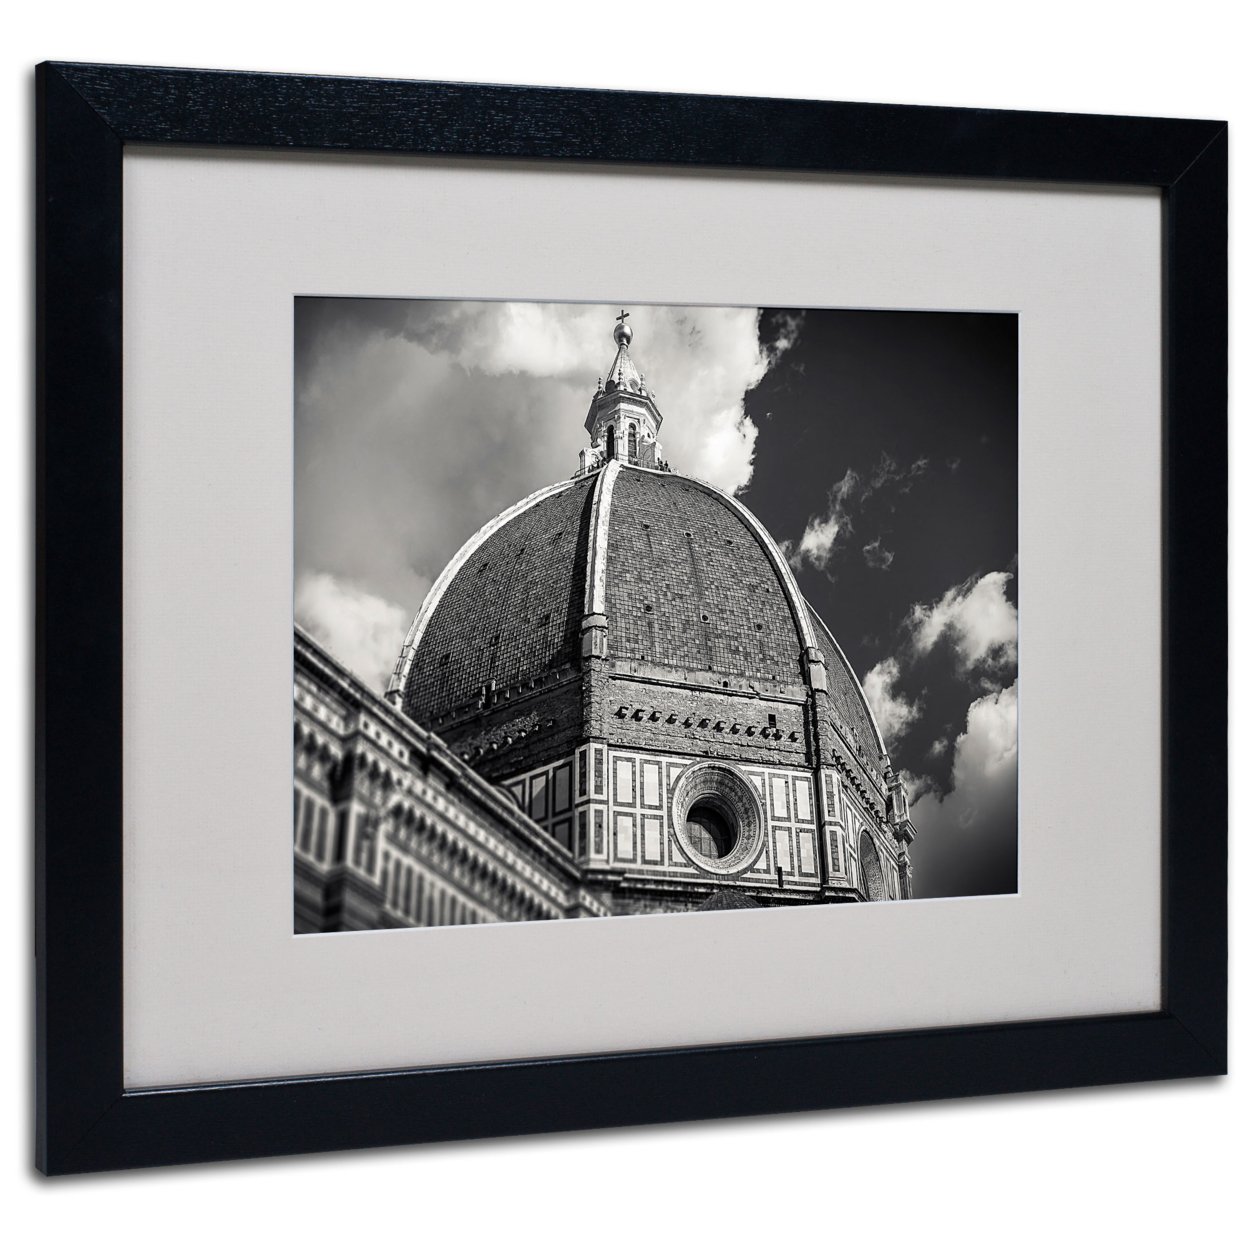 Giuseppe Torre 'The Big Dome' Black Wooden Framed Art 18 X 22 Inches